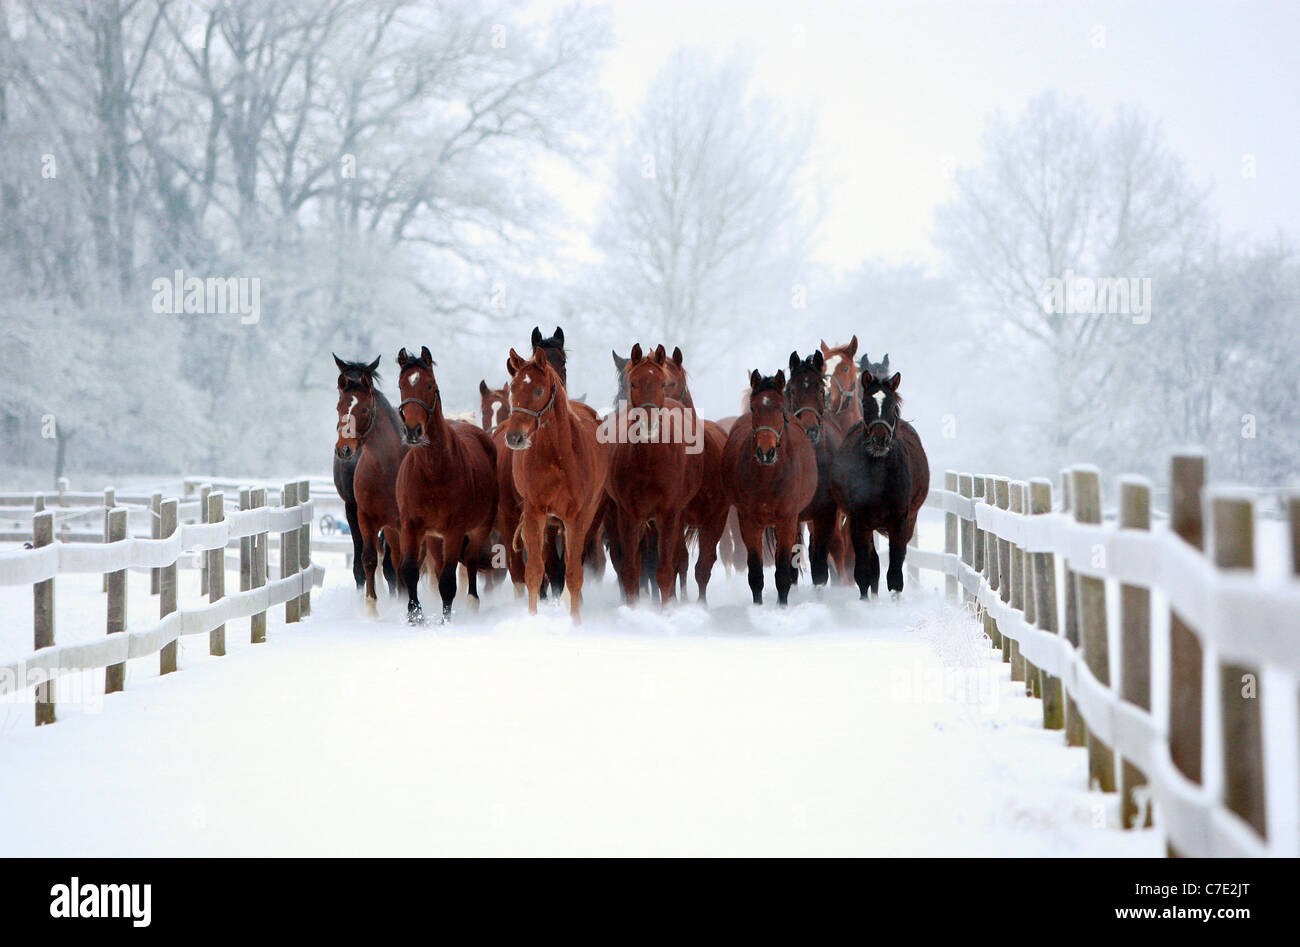 Horses in winter on their way to a paddock Stock Photo